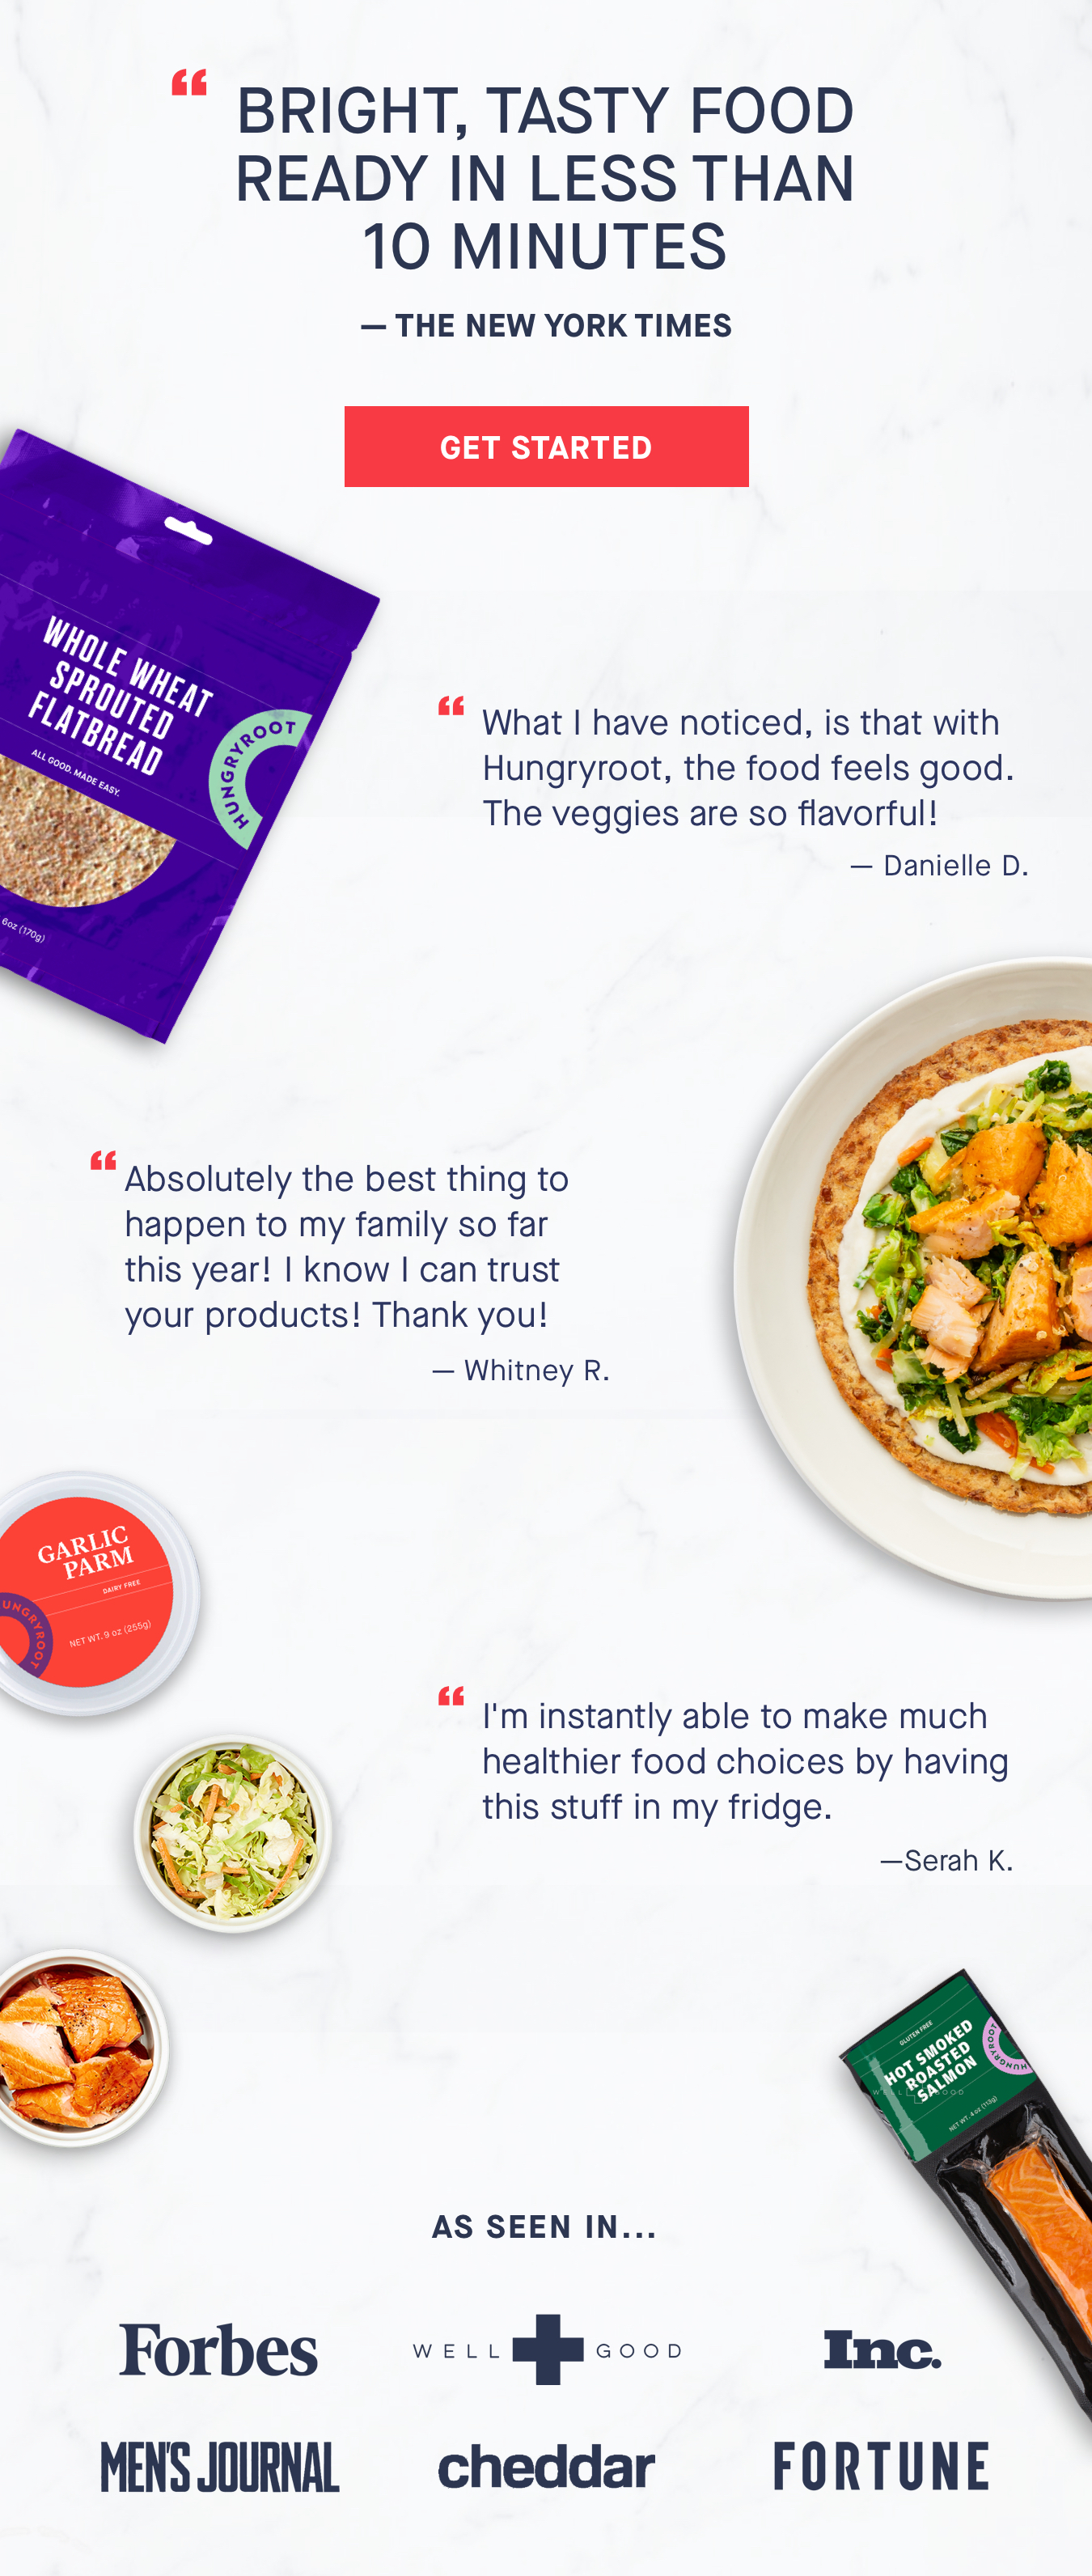 What I have noticed, is that with Hungryroot, the food feels good. The veggies are so flavorful!" - Danielle D. ; "Absolutely the best thing to happen to my family this year! I know I can trust your products! Thank you!" - Whitney R. 